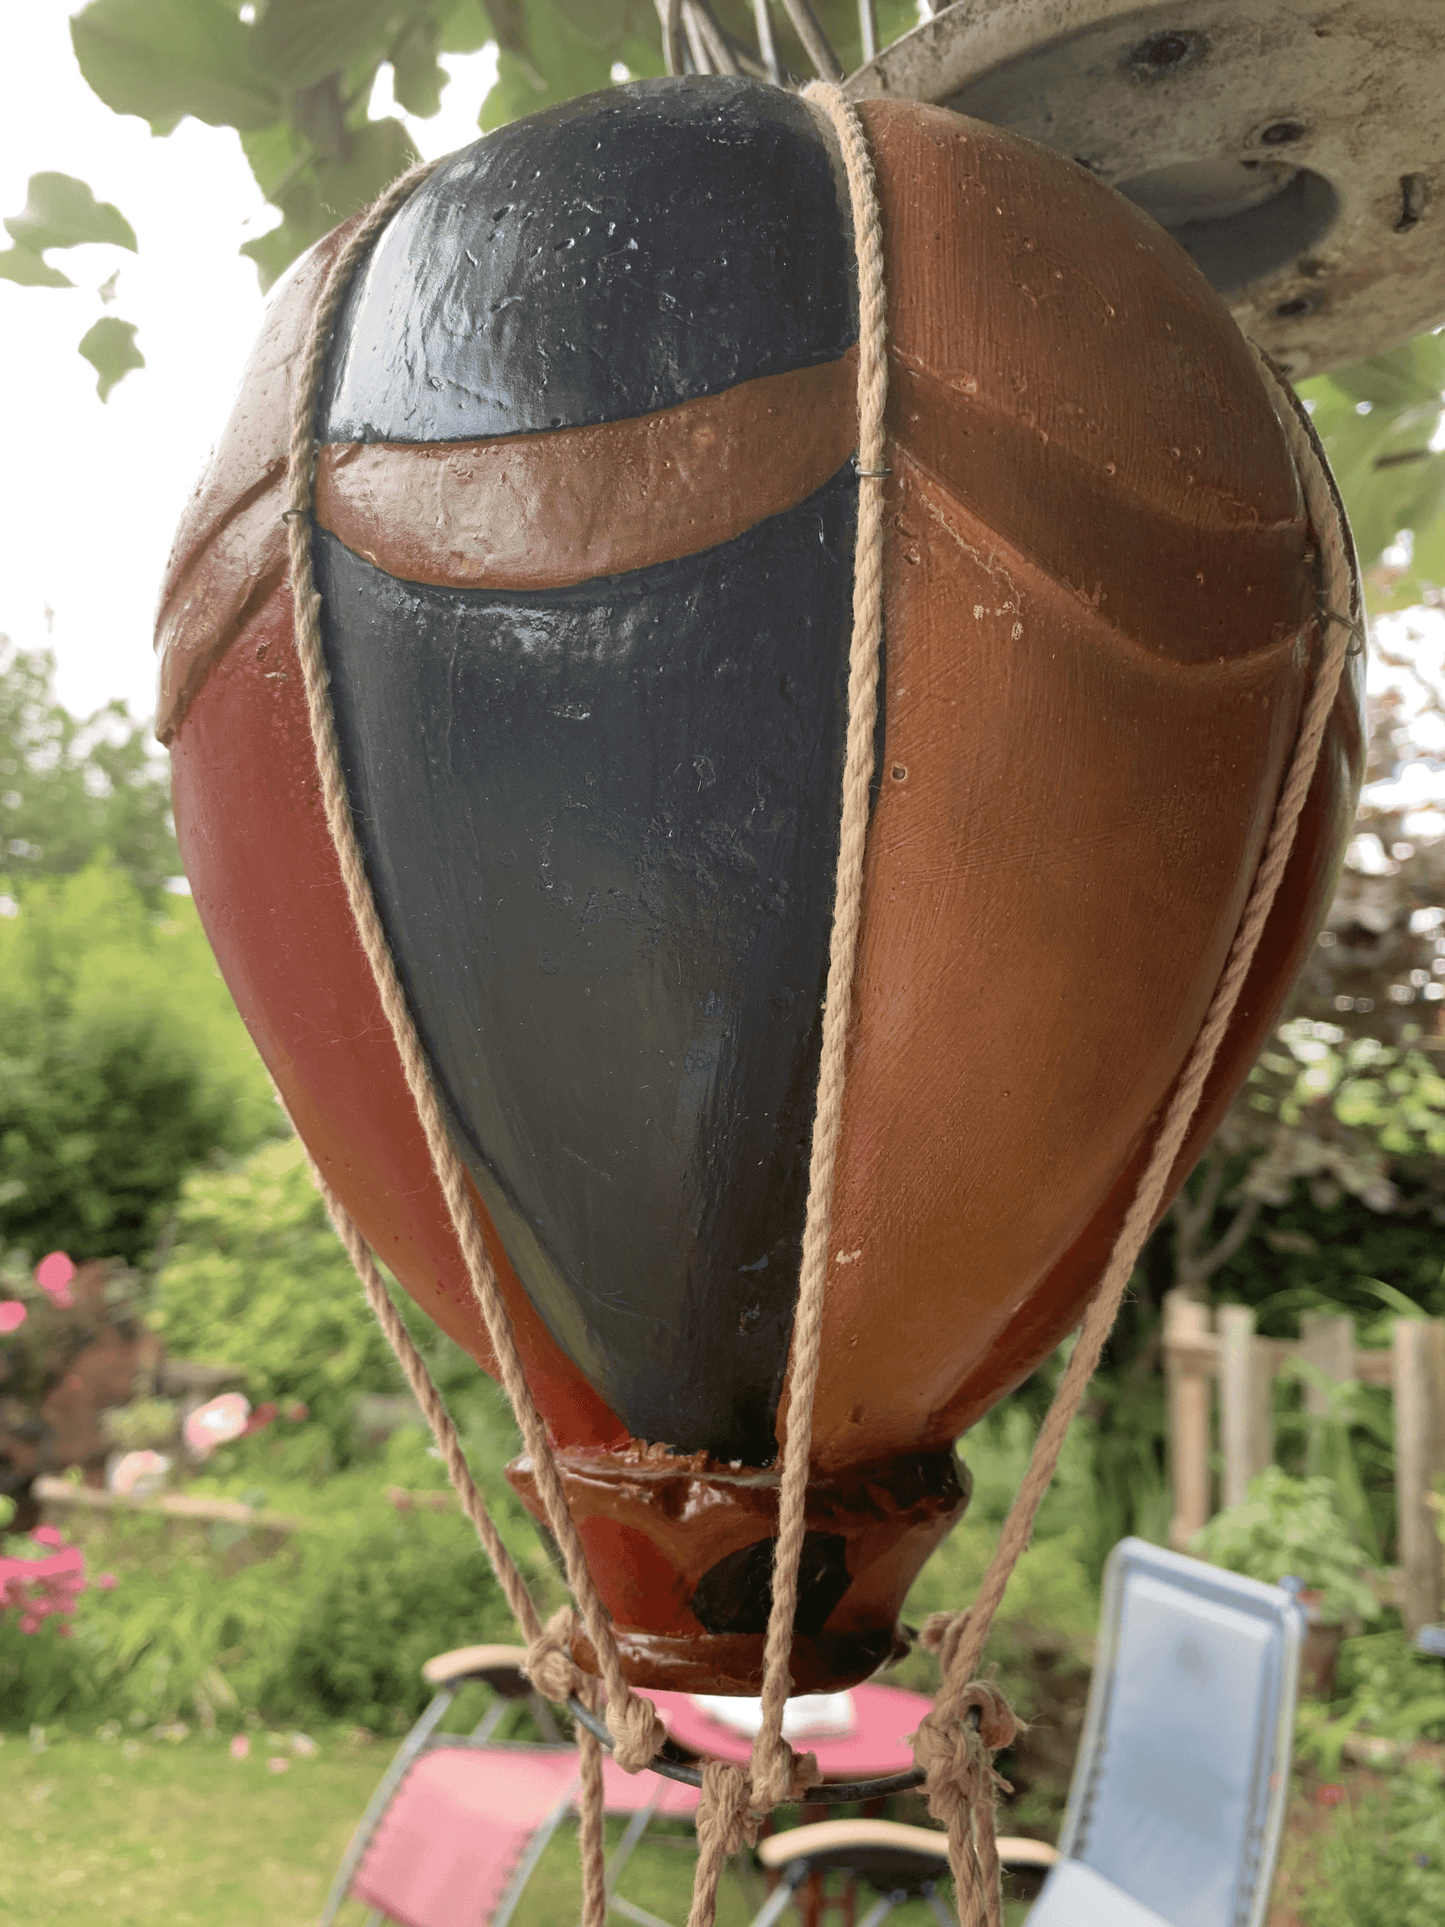 Large Vintage Hot Air Balloon - Captivating Nostalgia and Whimsical Charm